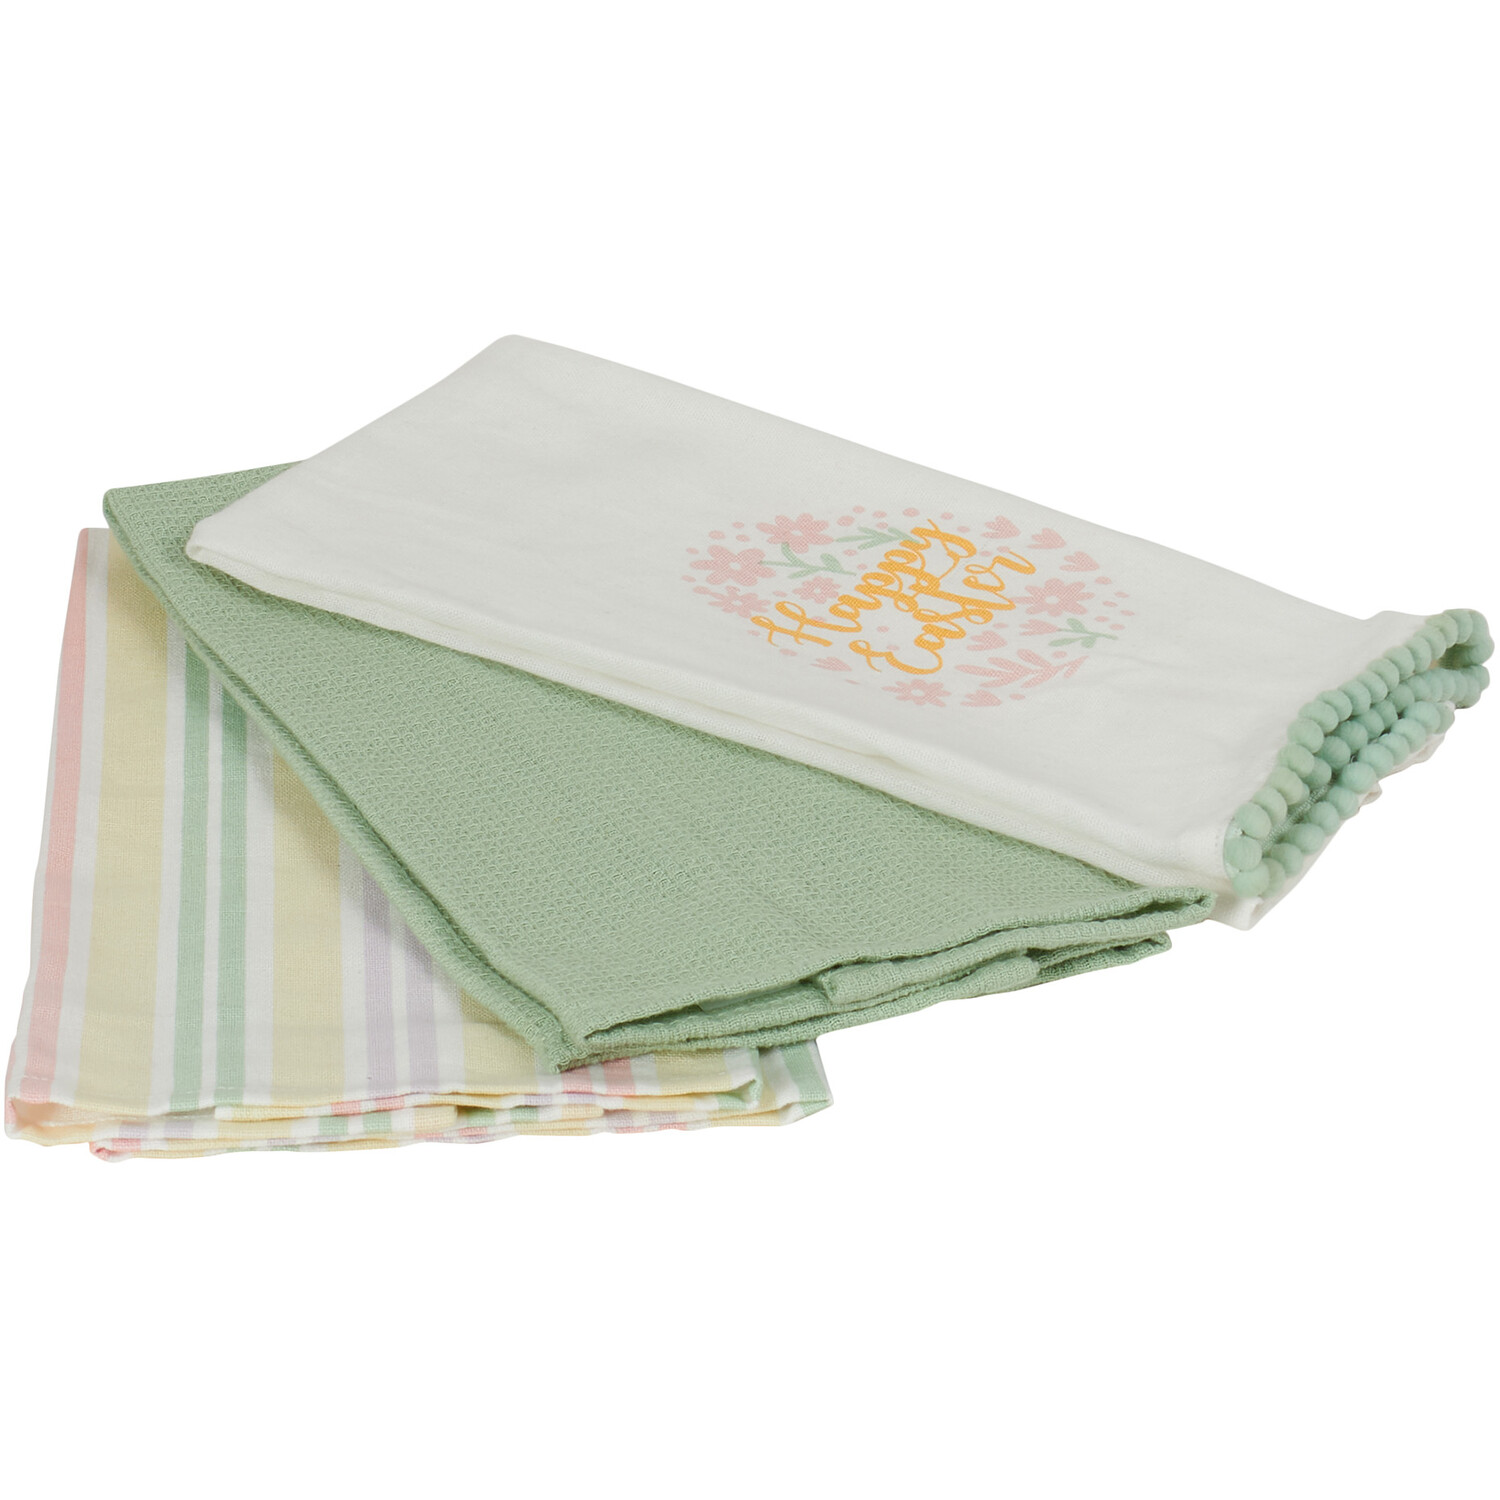 Pack of 3 Happy Easter Tea Towels - Green Image 3